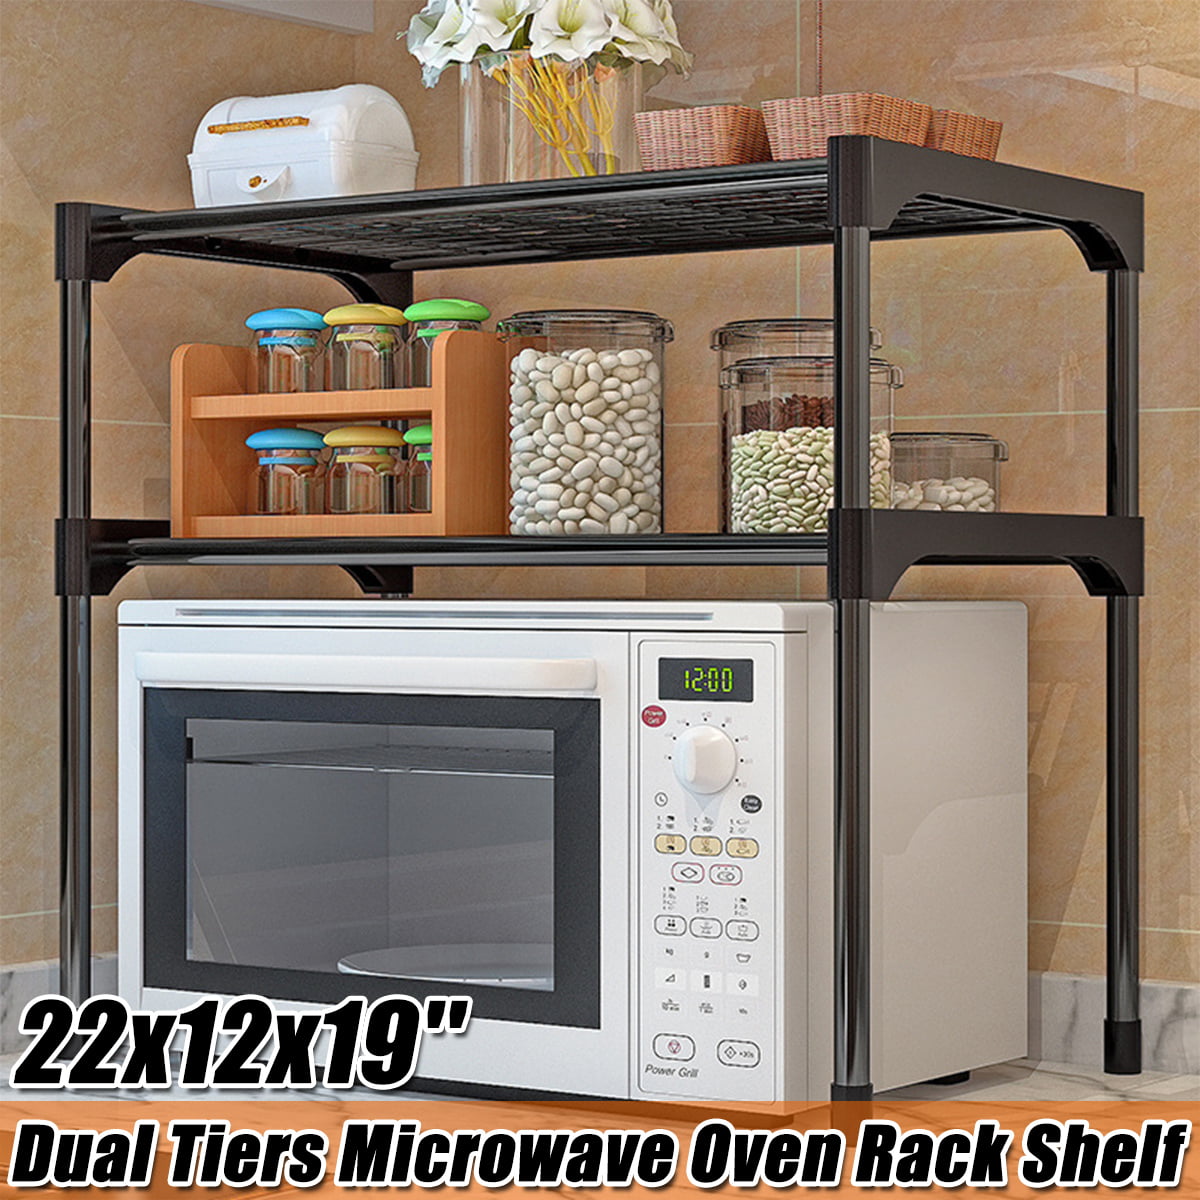 YORKING 2-layer Multi-function Microwave Oven Stainless Steel Shelf Adjustable Kitchen Storage Rack With Hook 